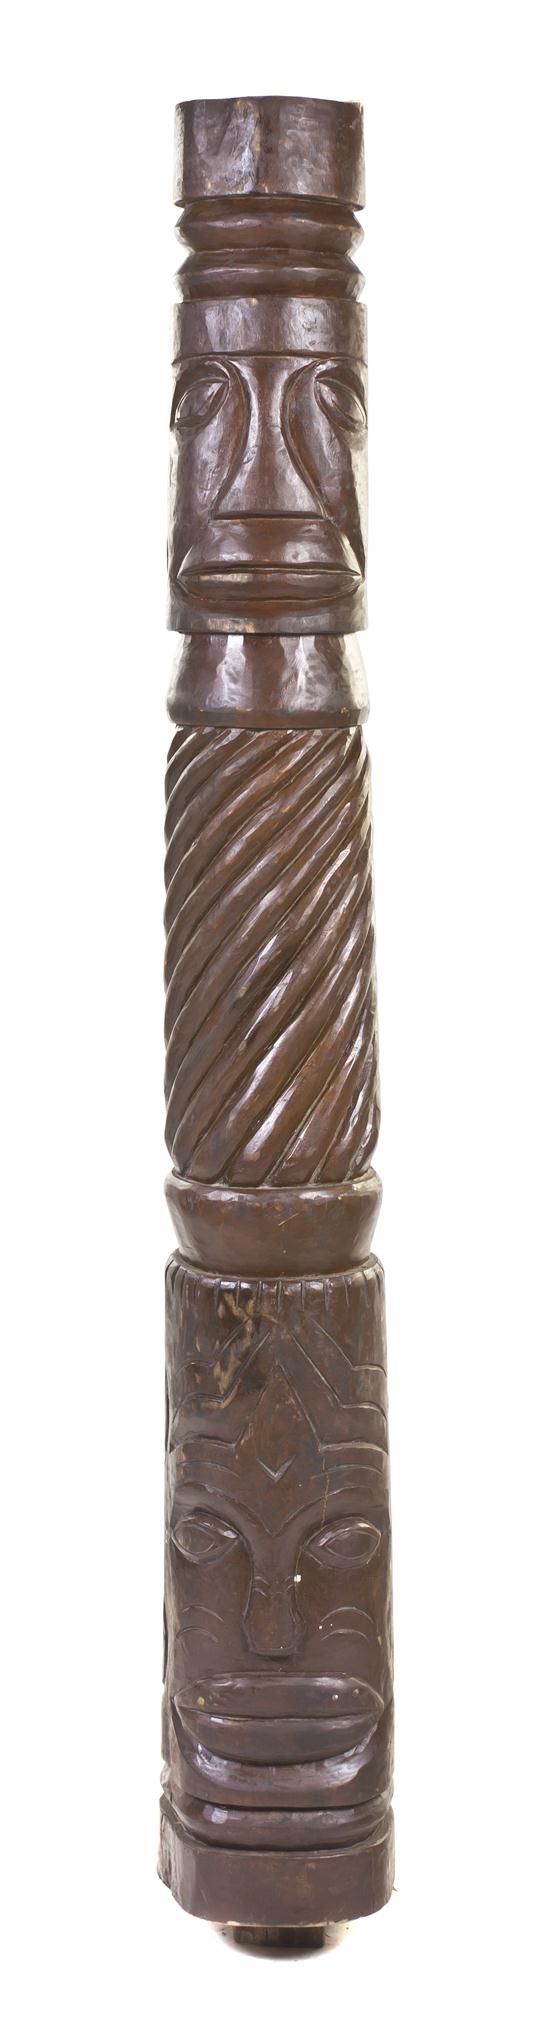 A Carved Wood Tiki Totem of cylindrical